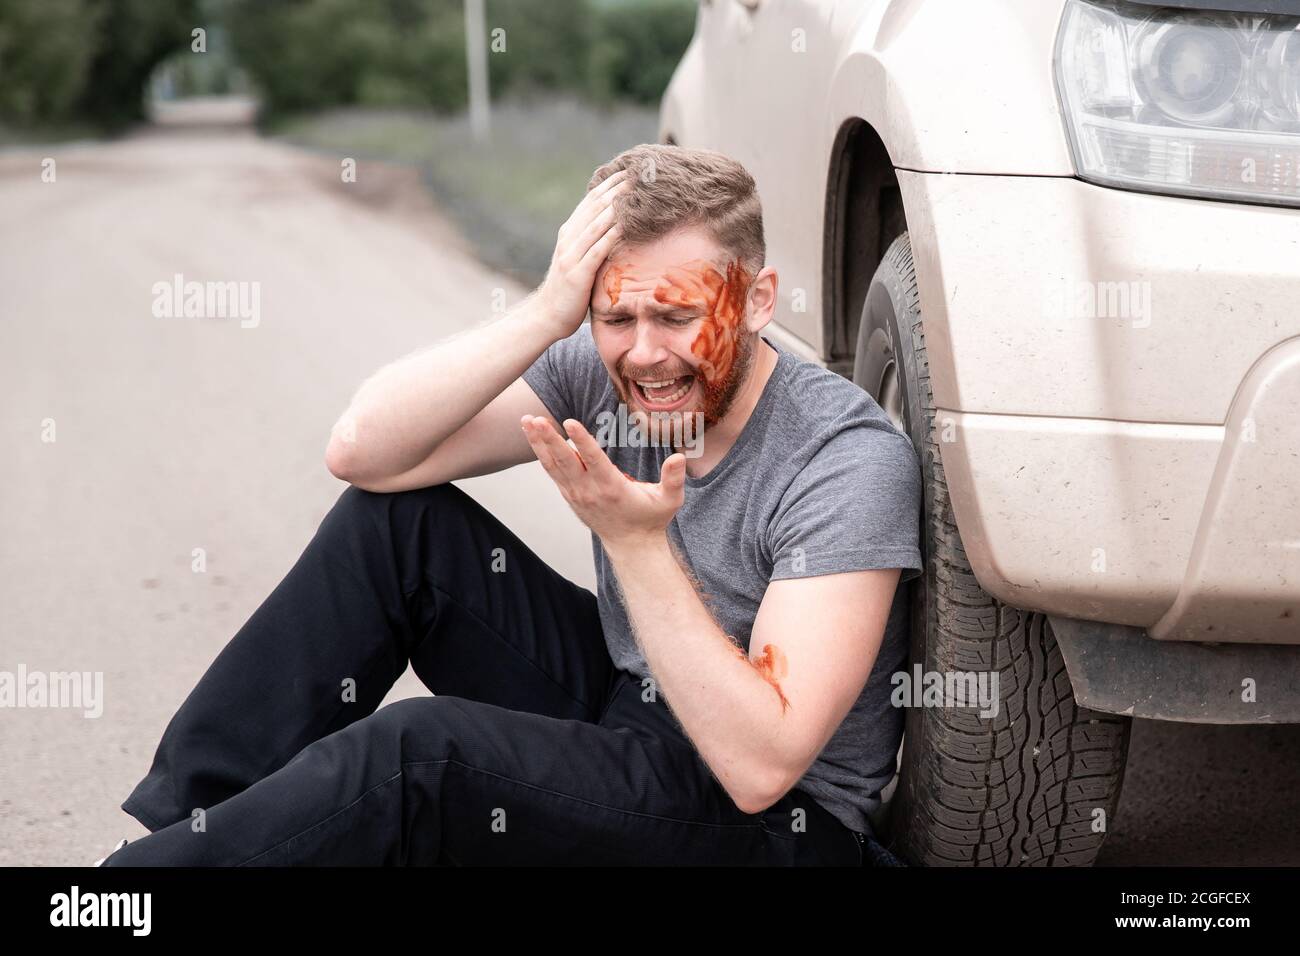 https://c8.alamy.com/comp/2CGFCEX/car-accident-man-sits-with-bloodied-head-near-wheel-screaming-and-crying-2CGFCEX.jpg